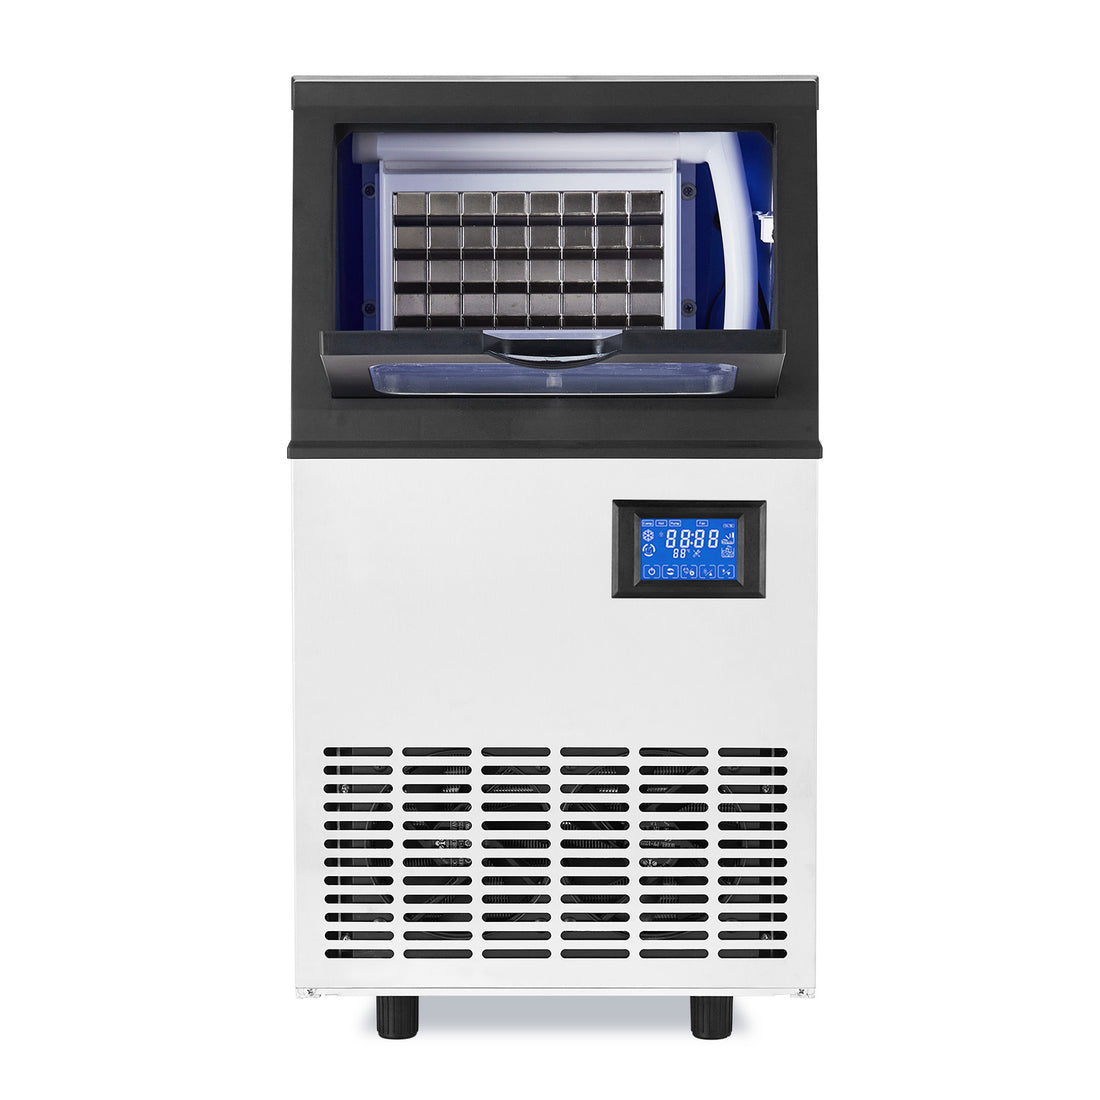 GARVEE 73Lbs/24H, Ice Maker, 22Lbs Storage, Self-Cleaning, Stainless Steel, Freestanding/Under Counter, Ideal for Restaurant/Bar/Cafe/Shop/Home/Office